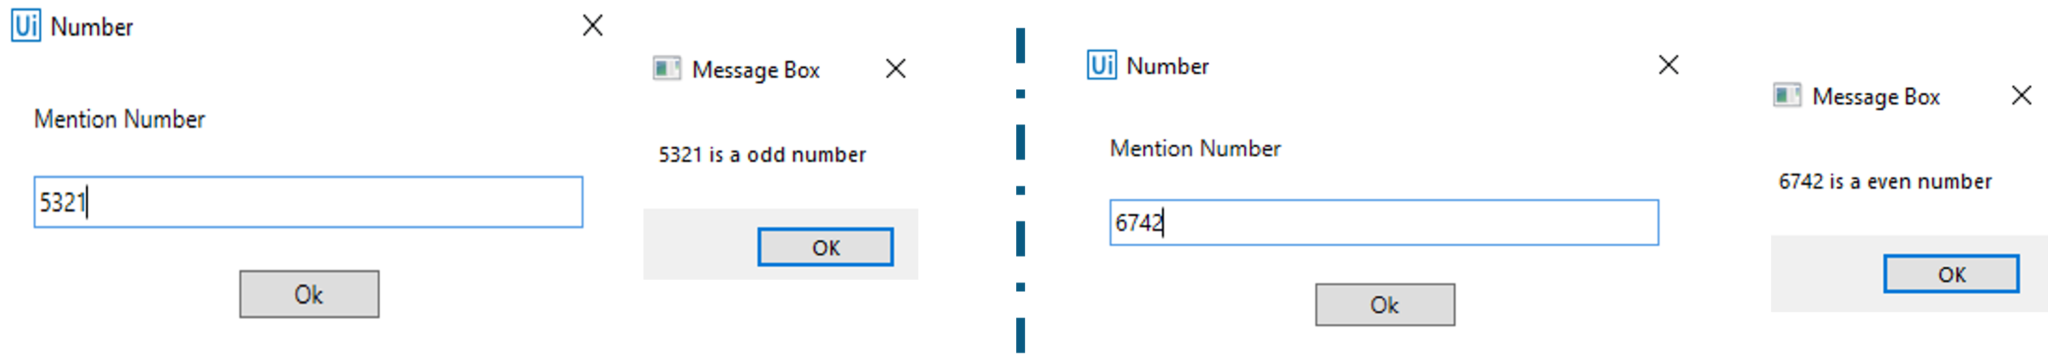 Output of If Activity - Variables,Data Types and Activities in UiPath - Edureka